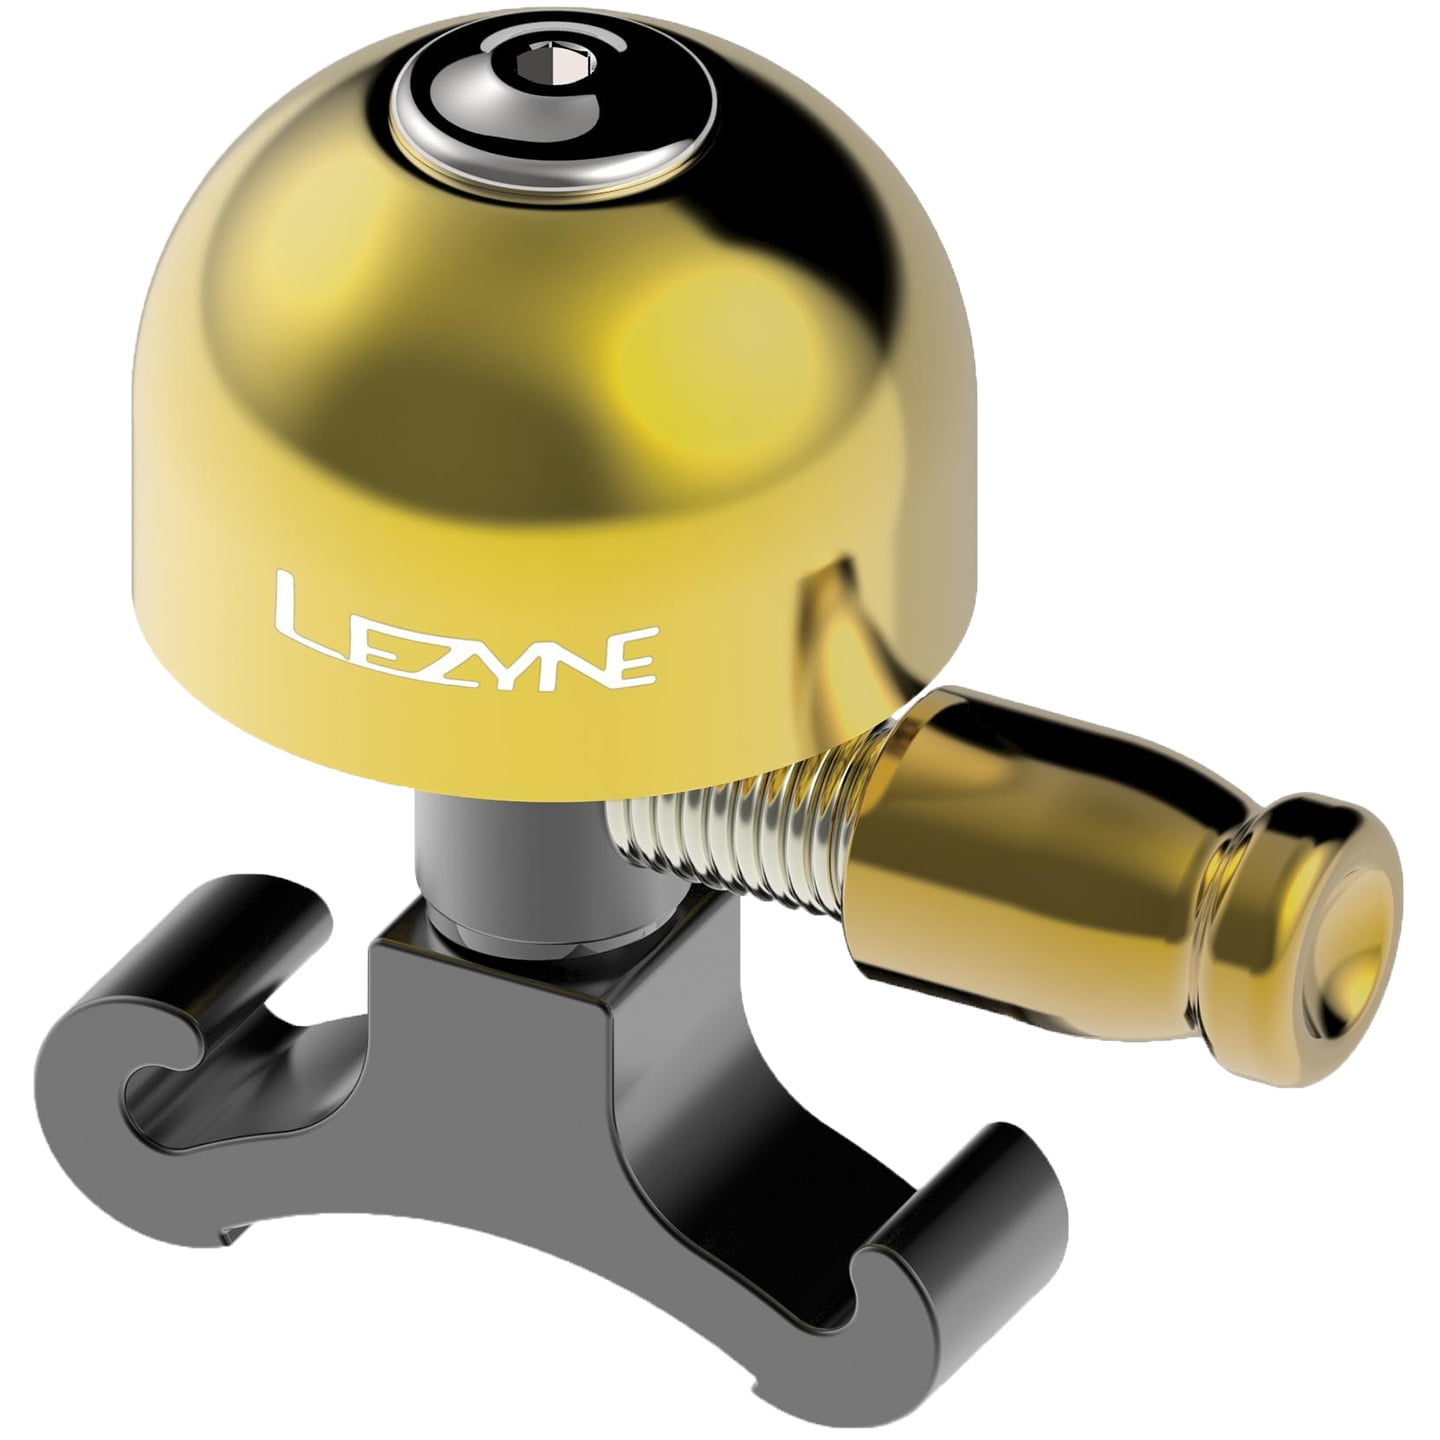 LEZYNE Brass Bell Bicycle Bell, Bike accessories